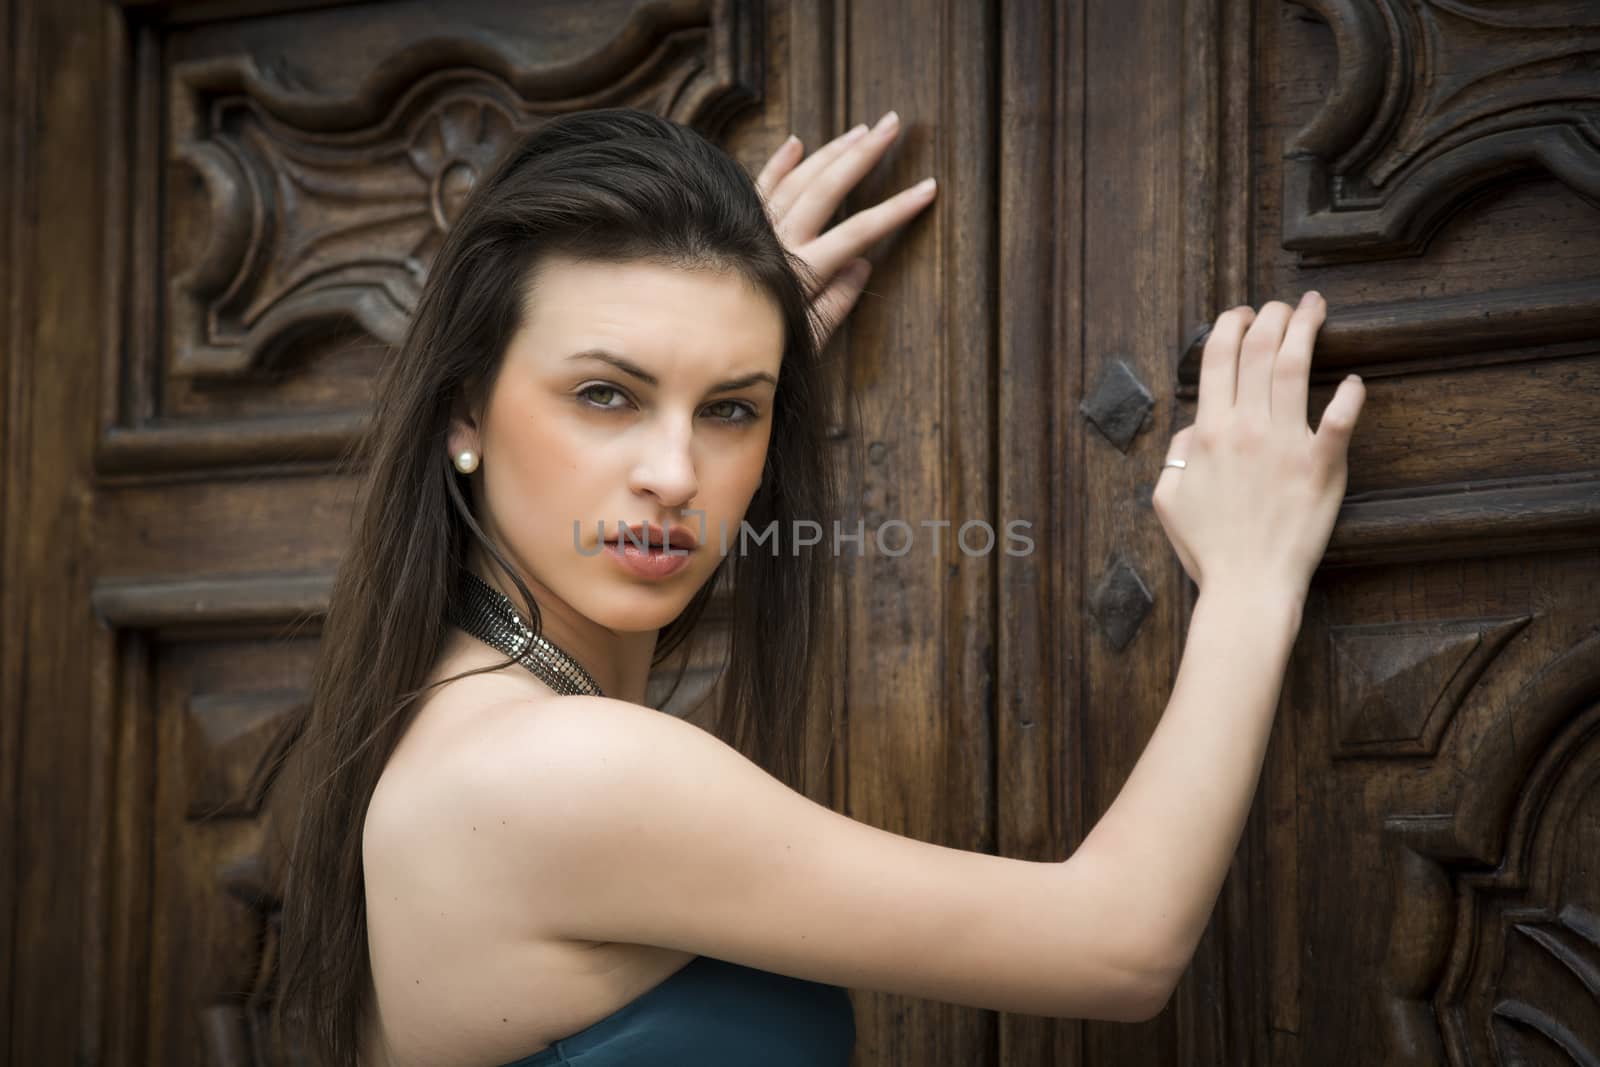 Pretty brunette girl outdoors with elegant dress leaning against old wood doors